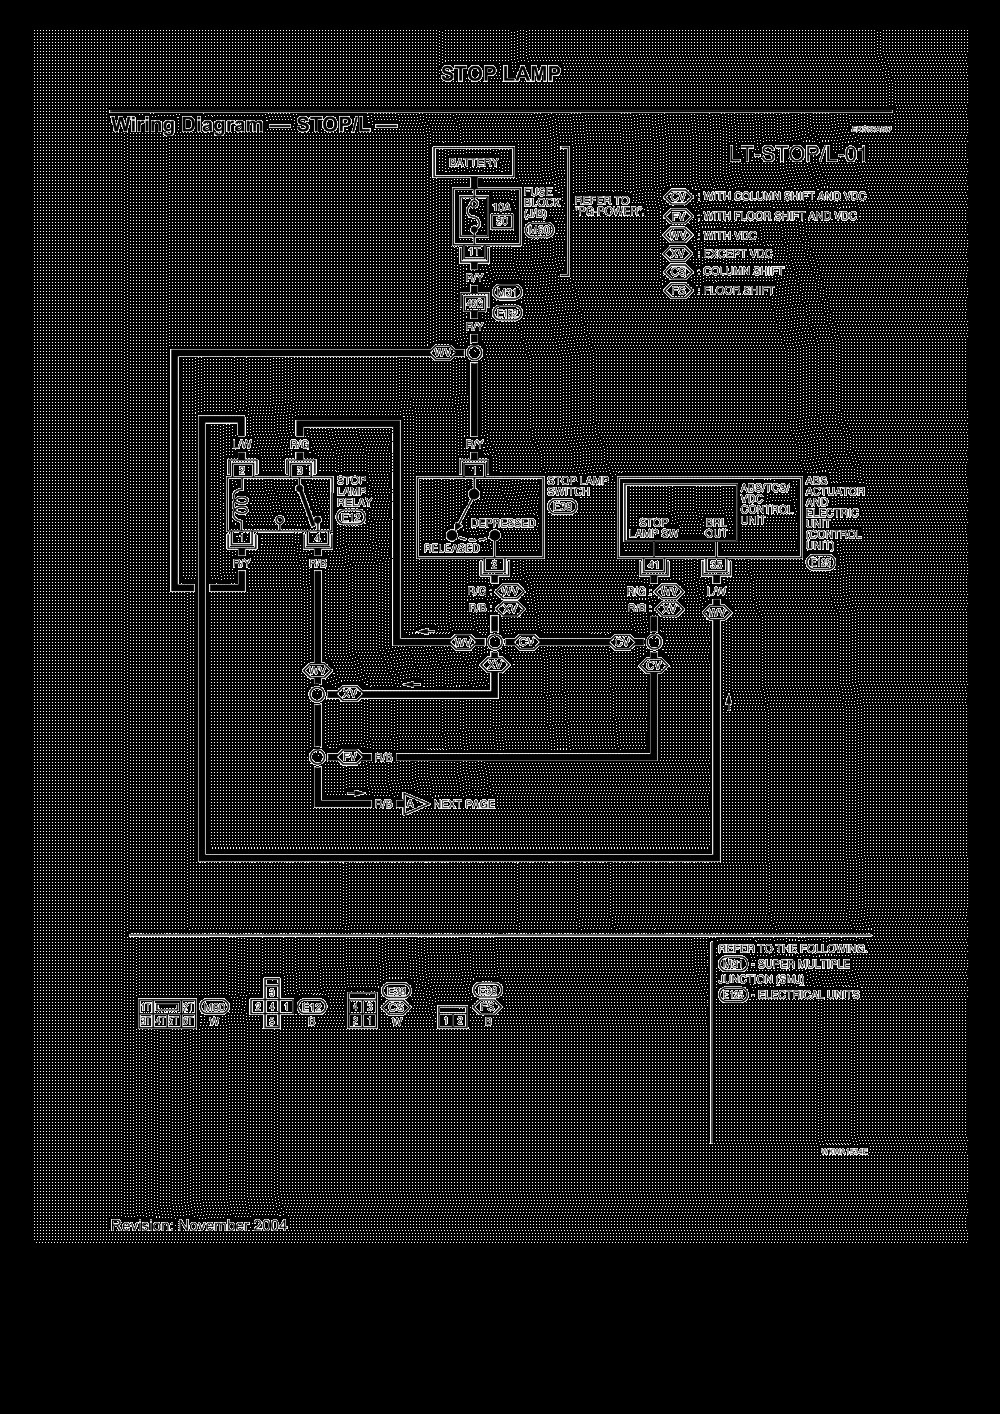 Wiring Diagram STOP L Page 01 2005